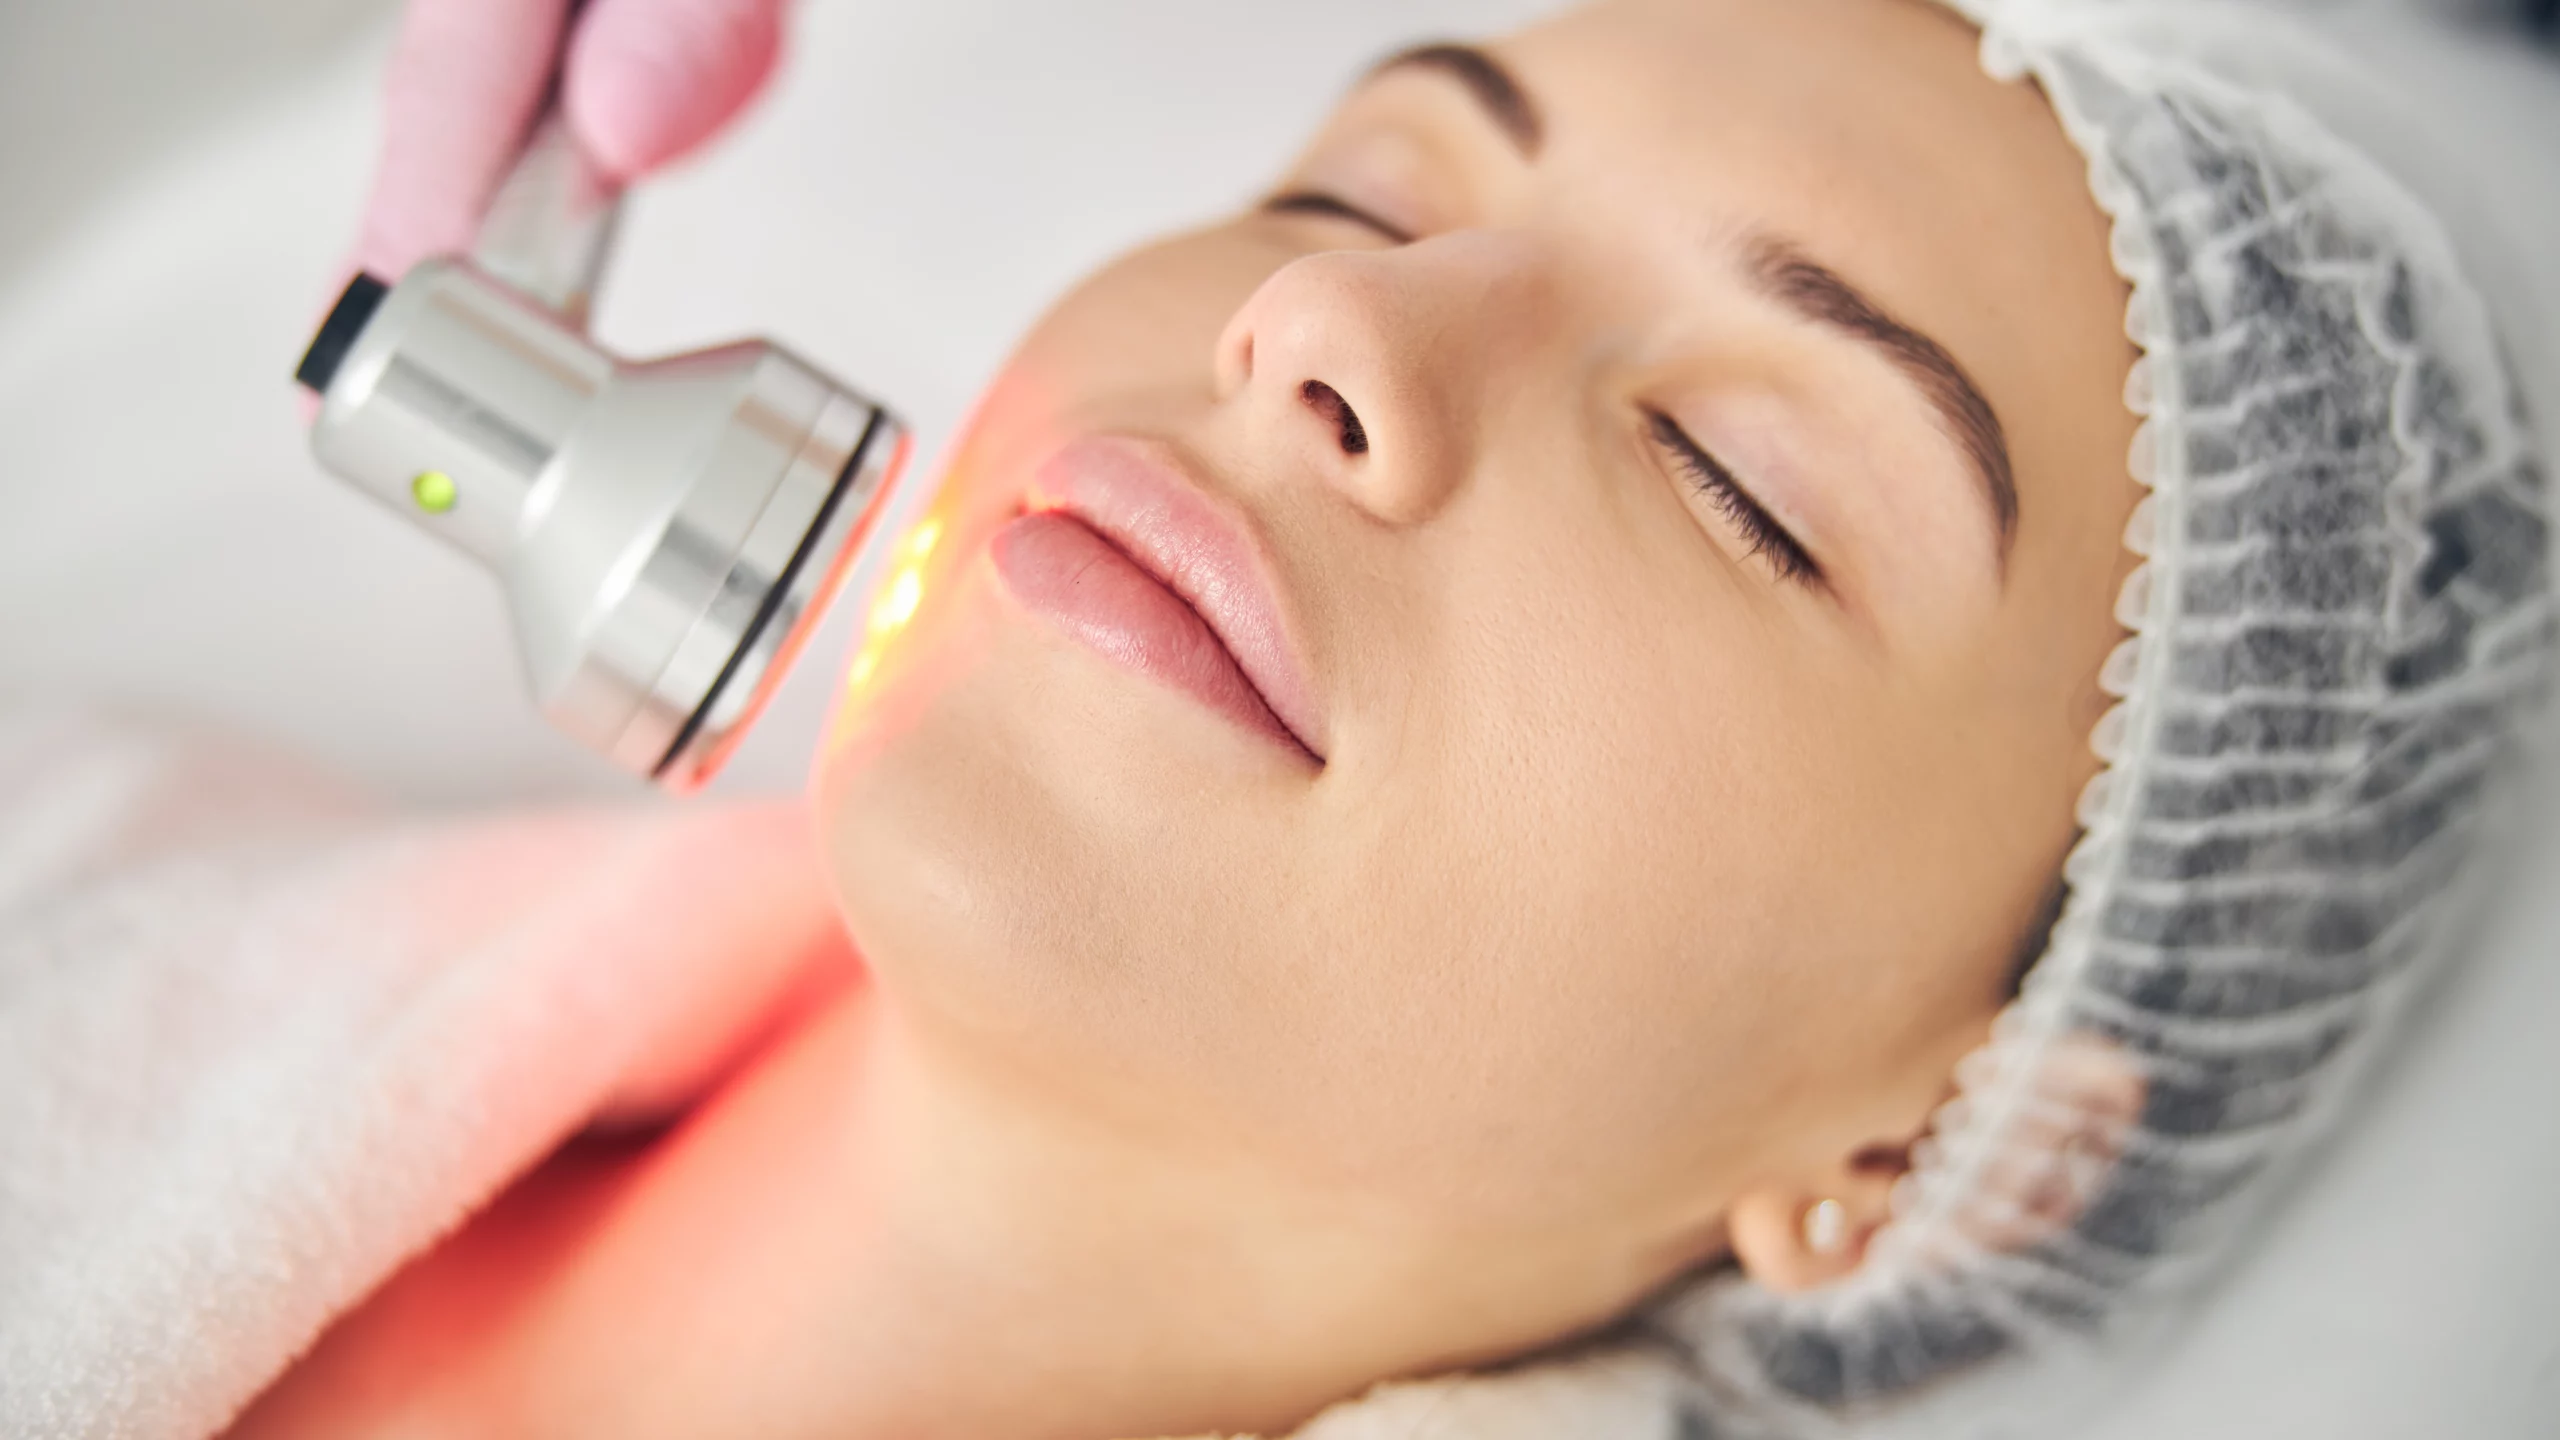 Young woman getting red light therapy on her face.